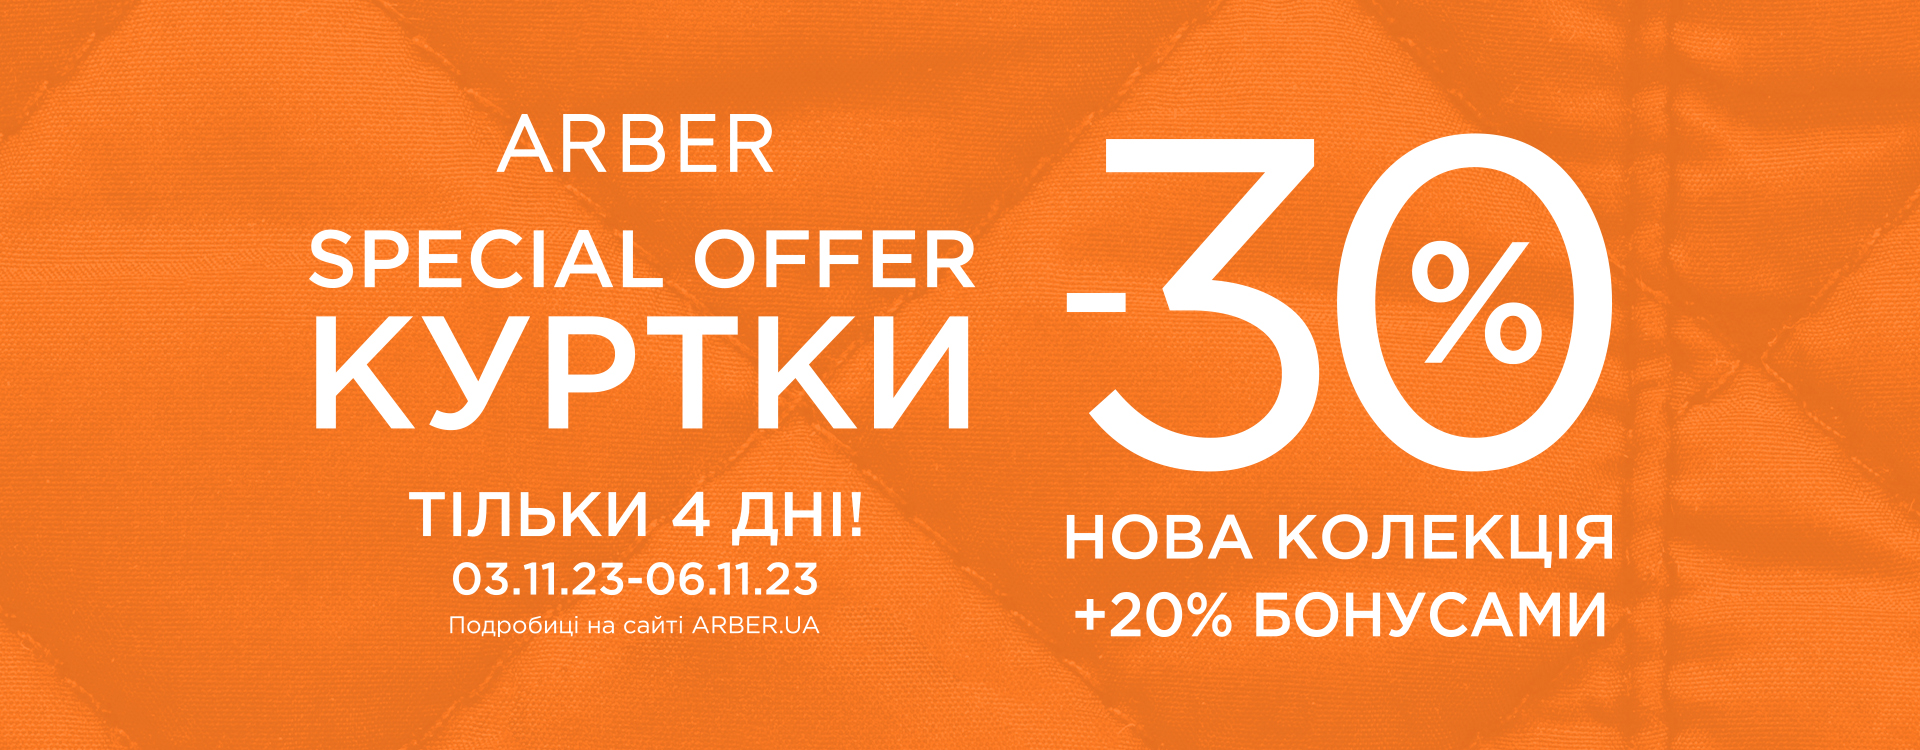 Only 4 days 30% discount at ARBER